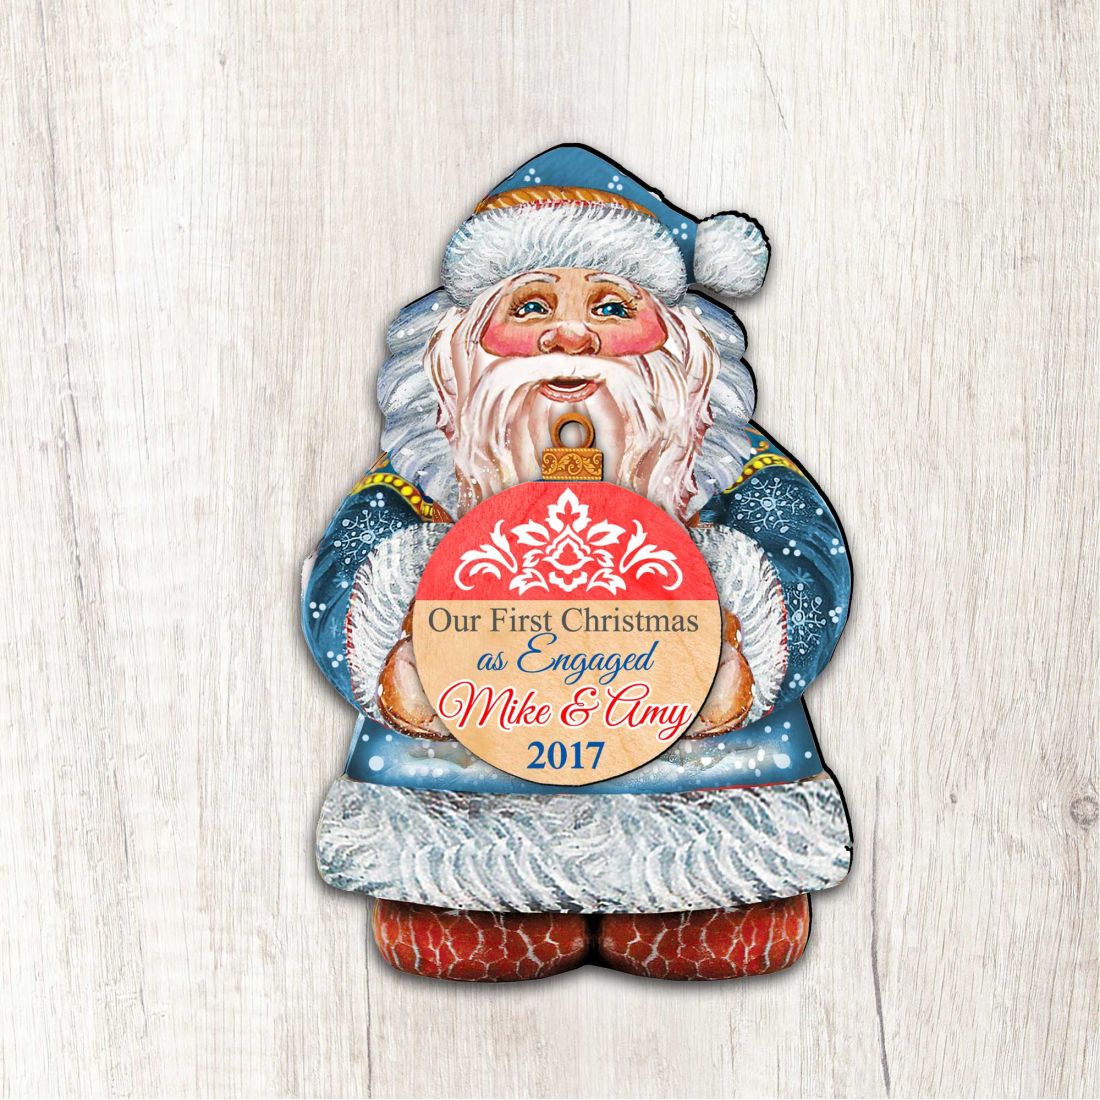 Instrumento 12 x 9 in. My First Christmas Santa Christmas Outdoor Decor Large Ornaments